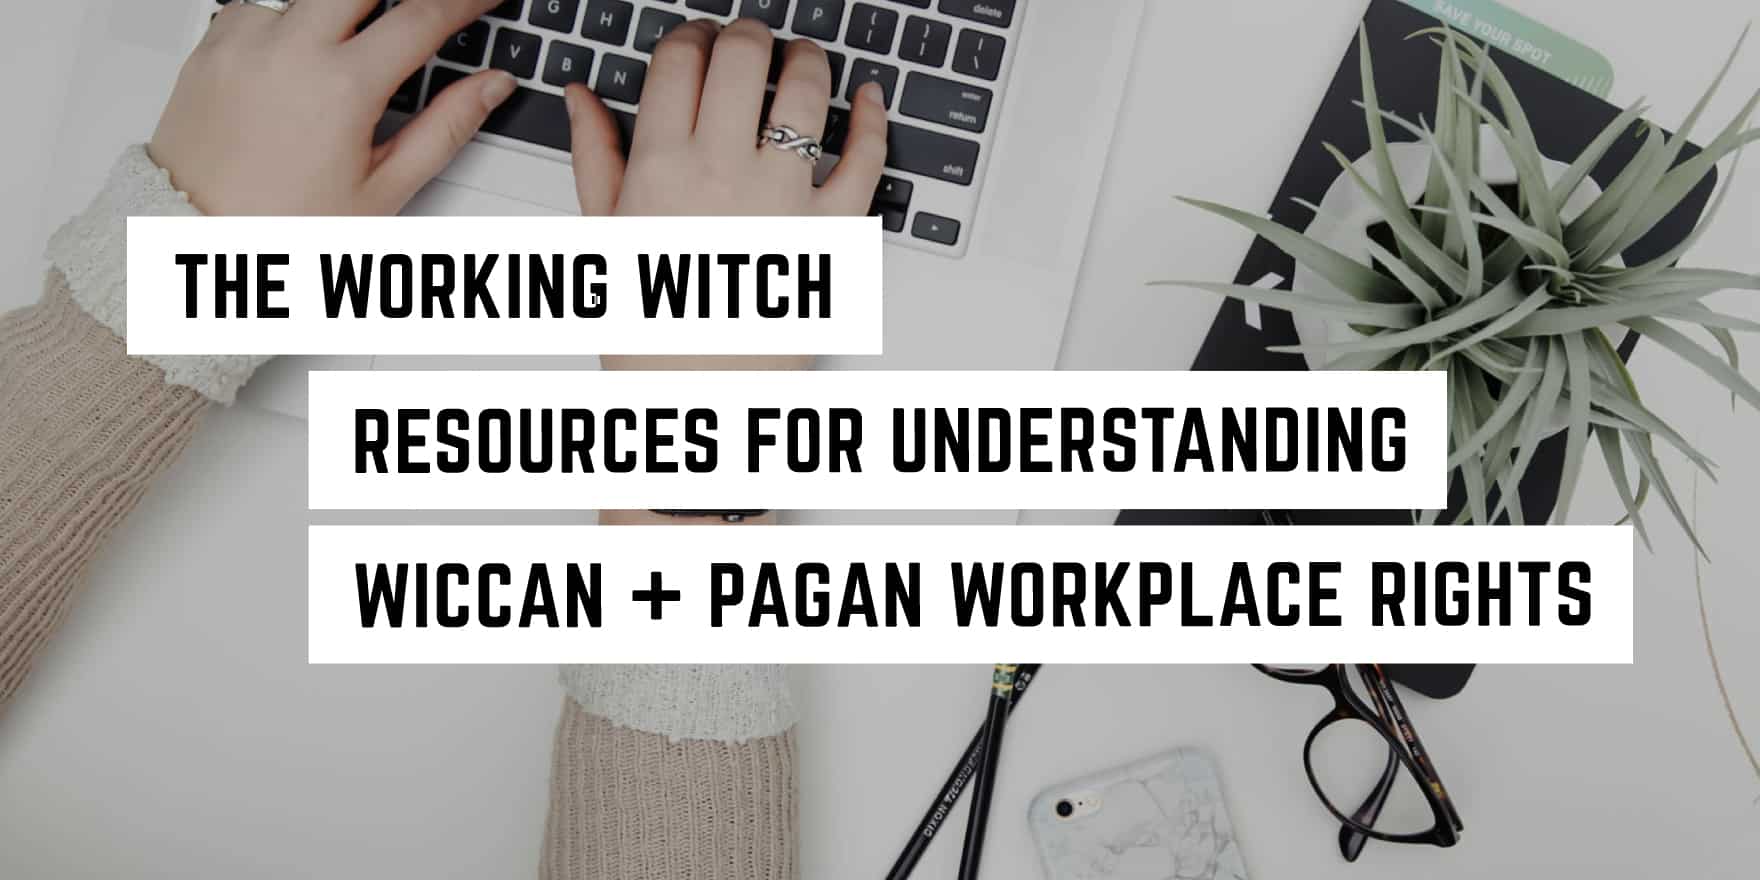 The Working Witch: Resources for Understanding Wiccan and Pagan Workplace Rights